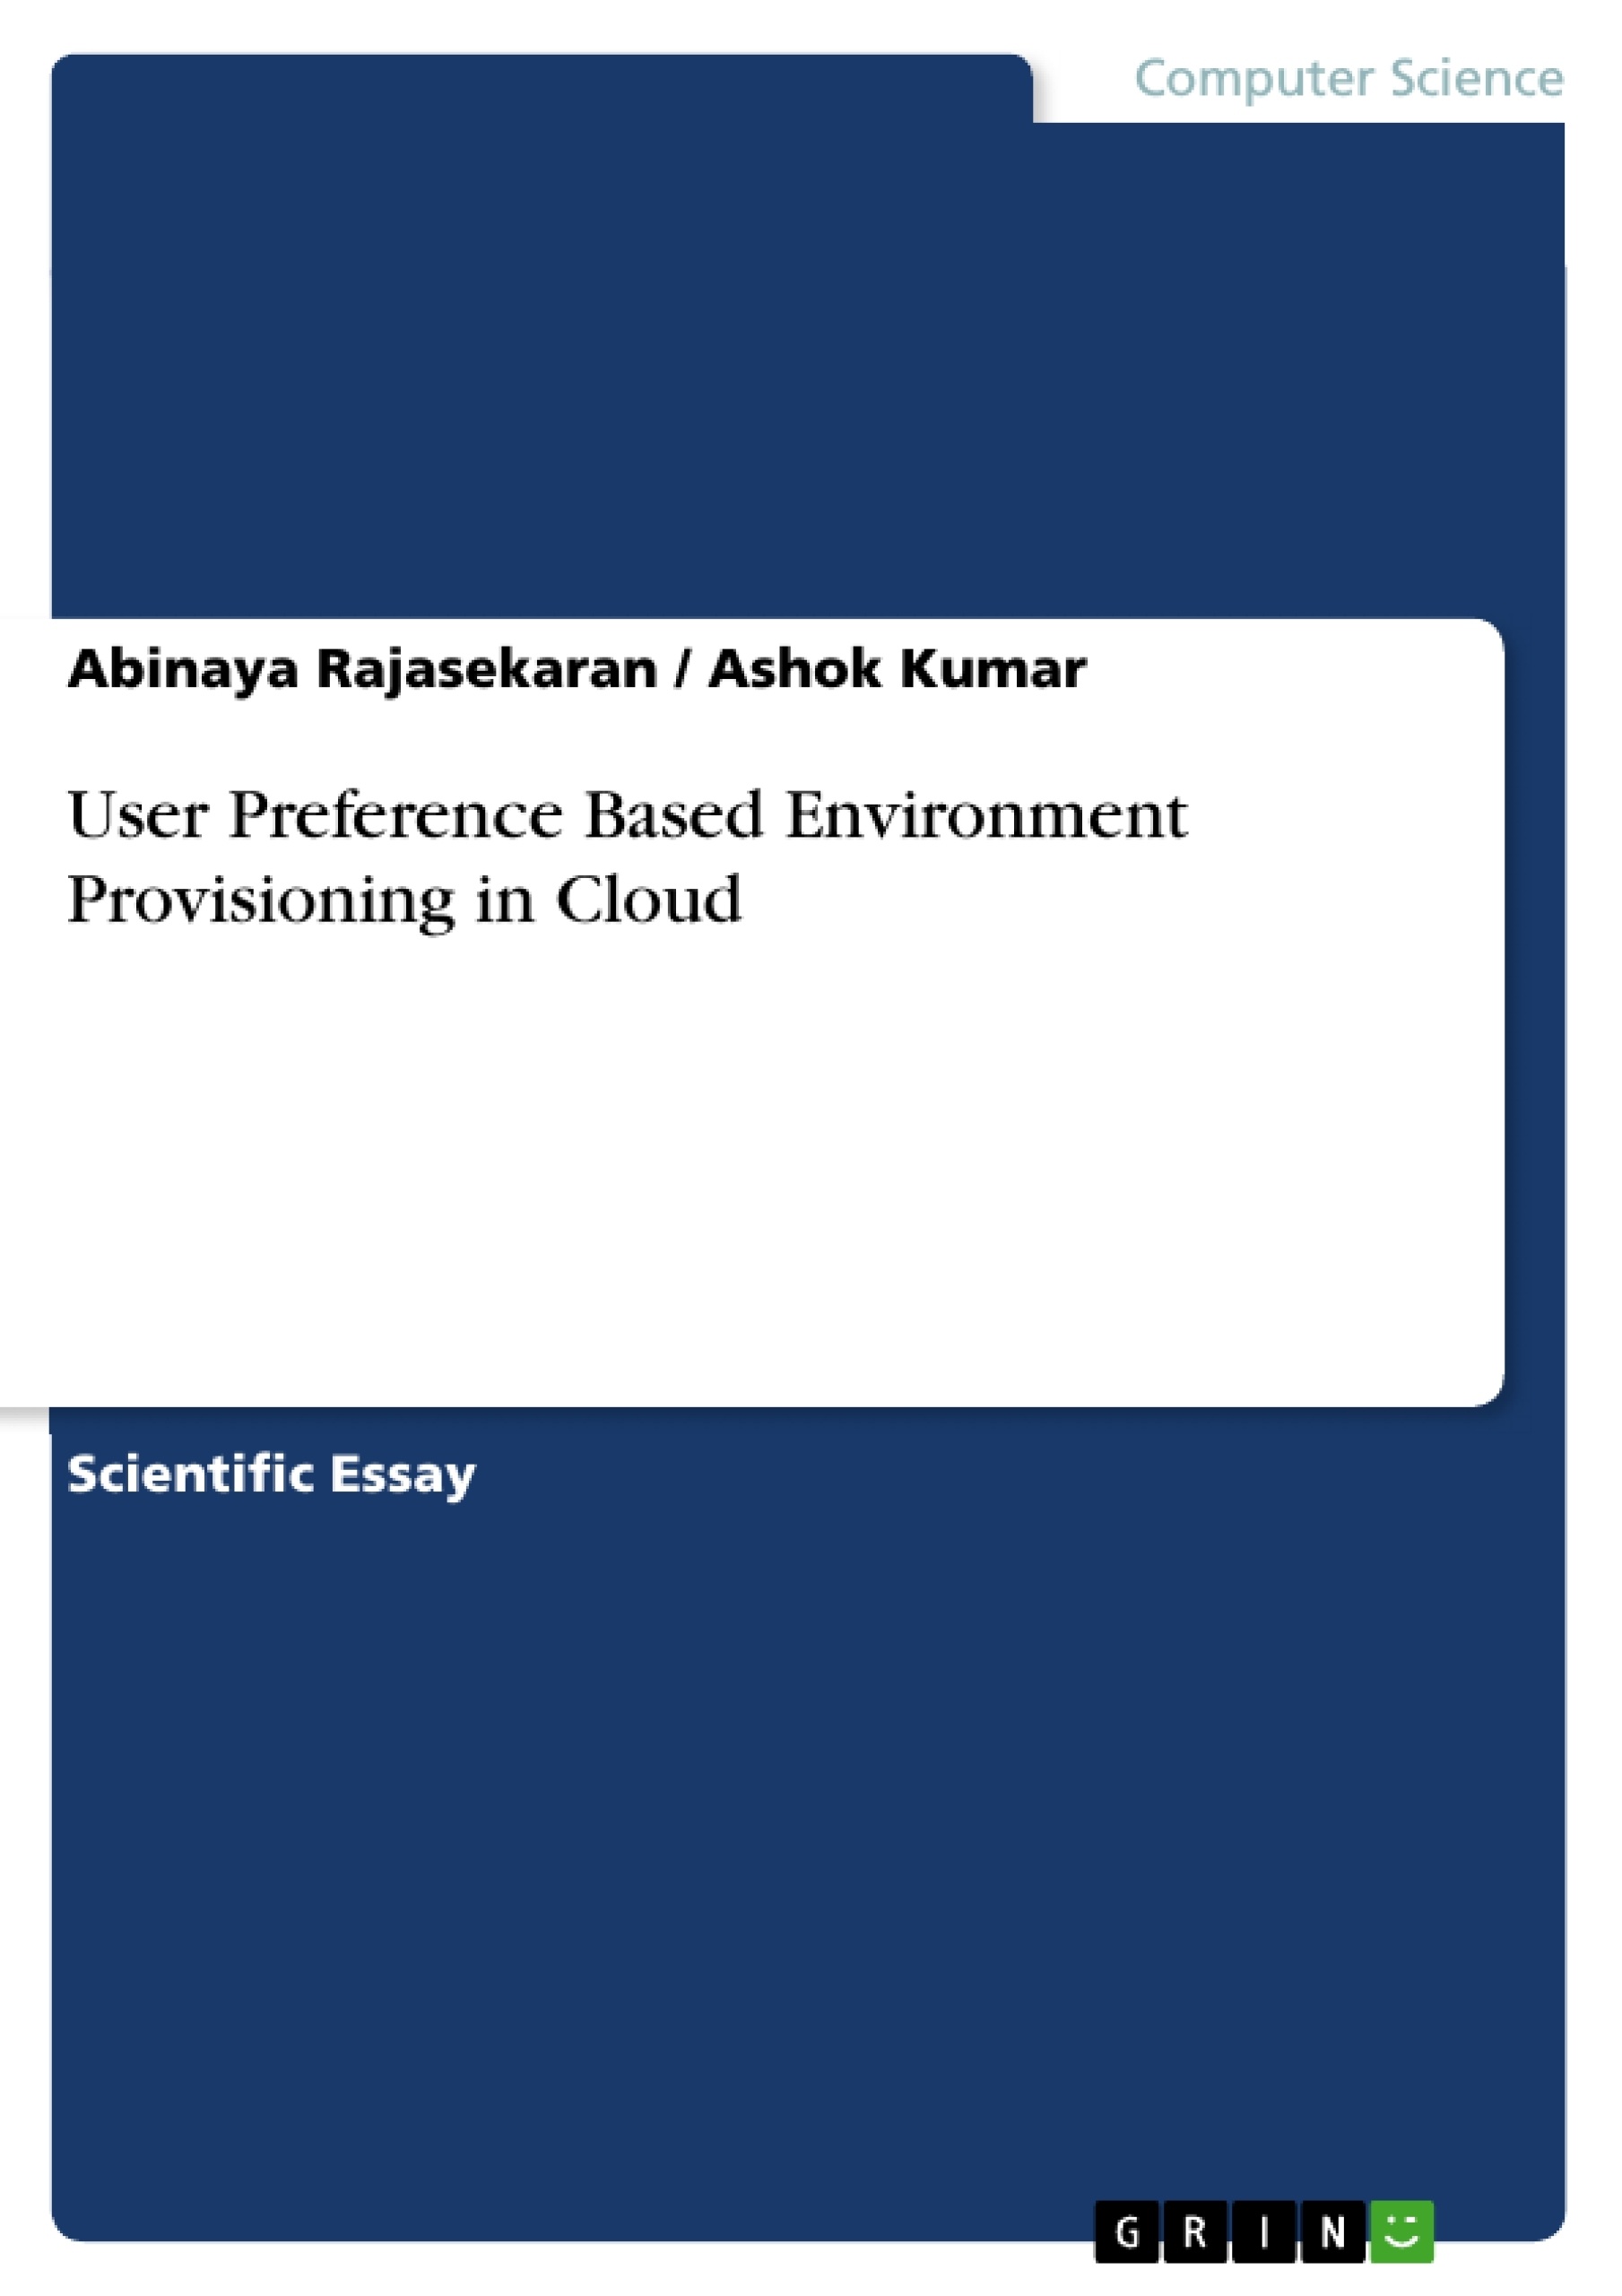 Title: User Preference Based Environment Provisioning in Cloud